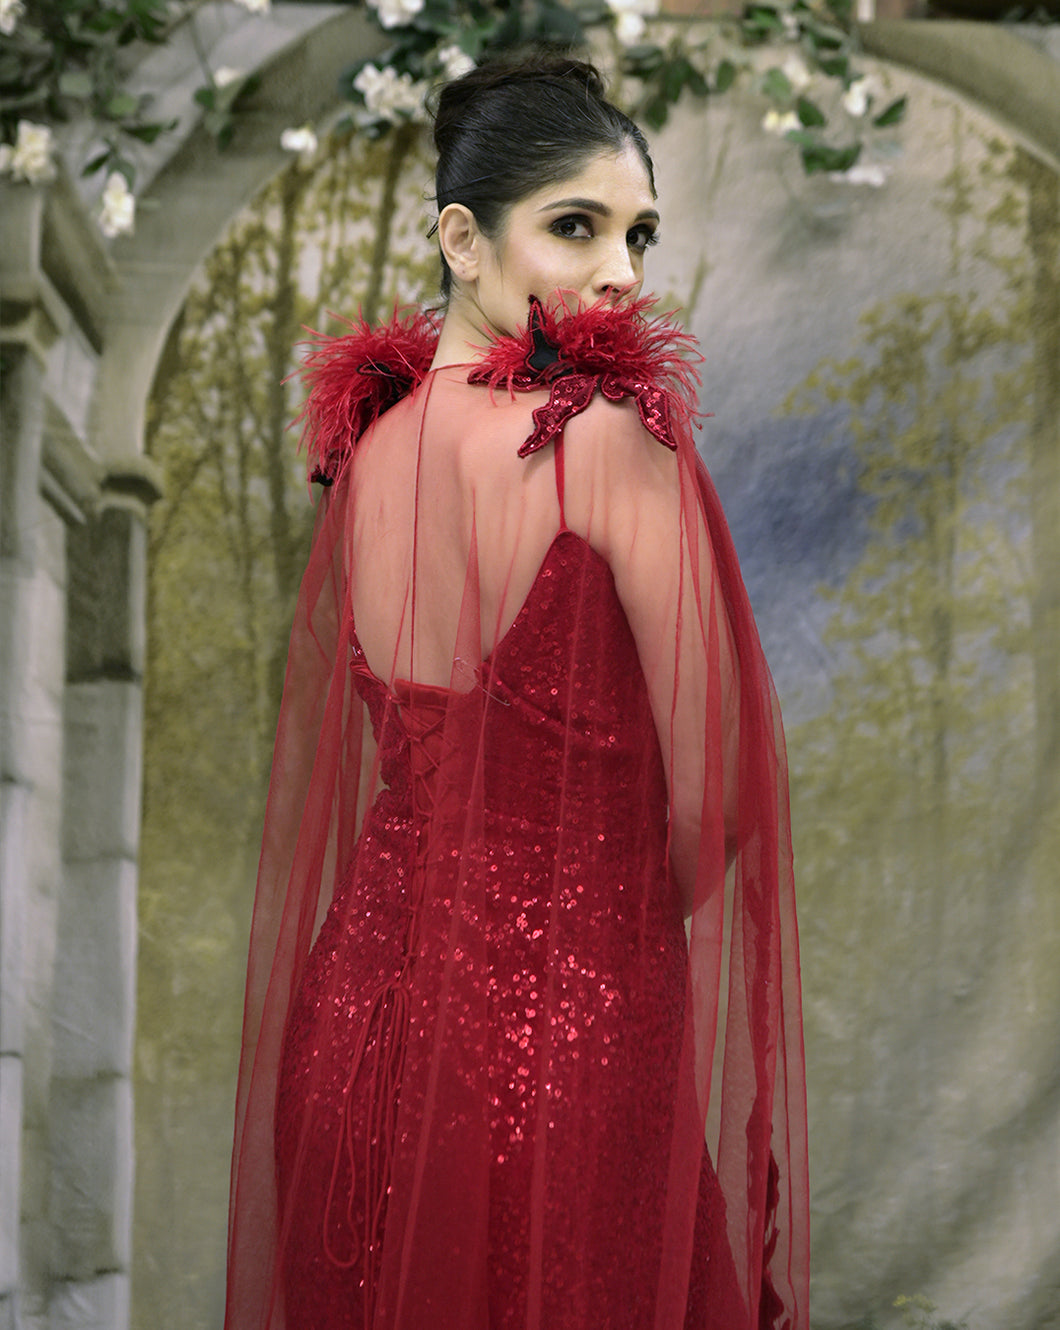 The red cape gown